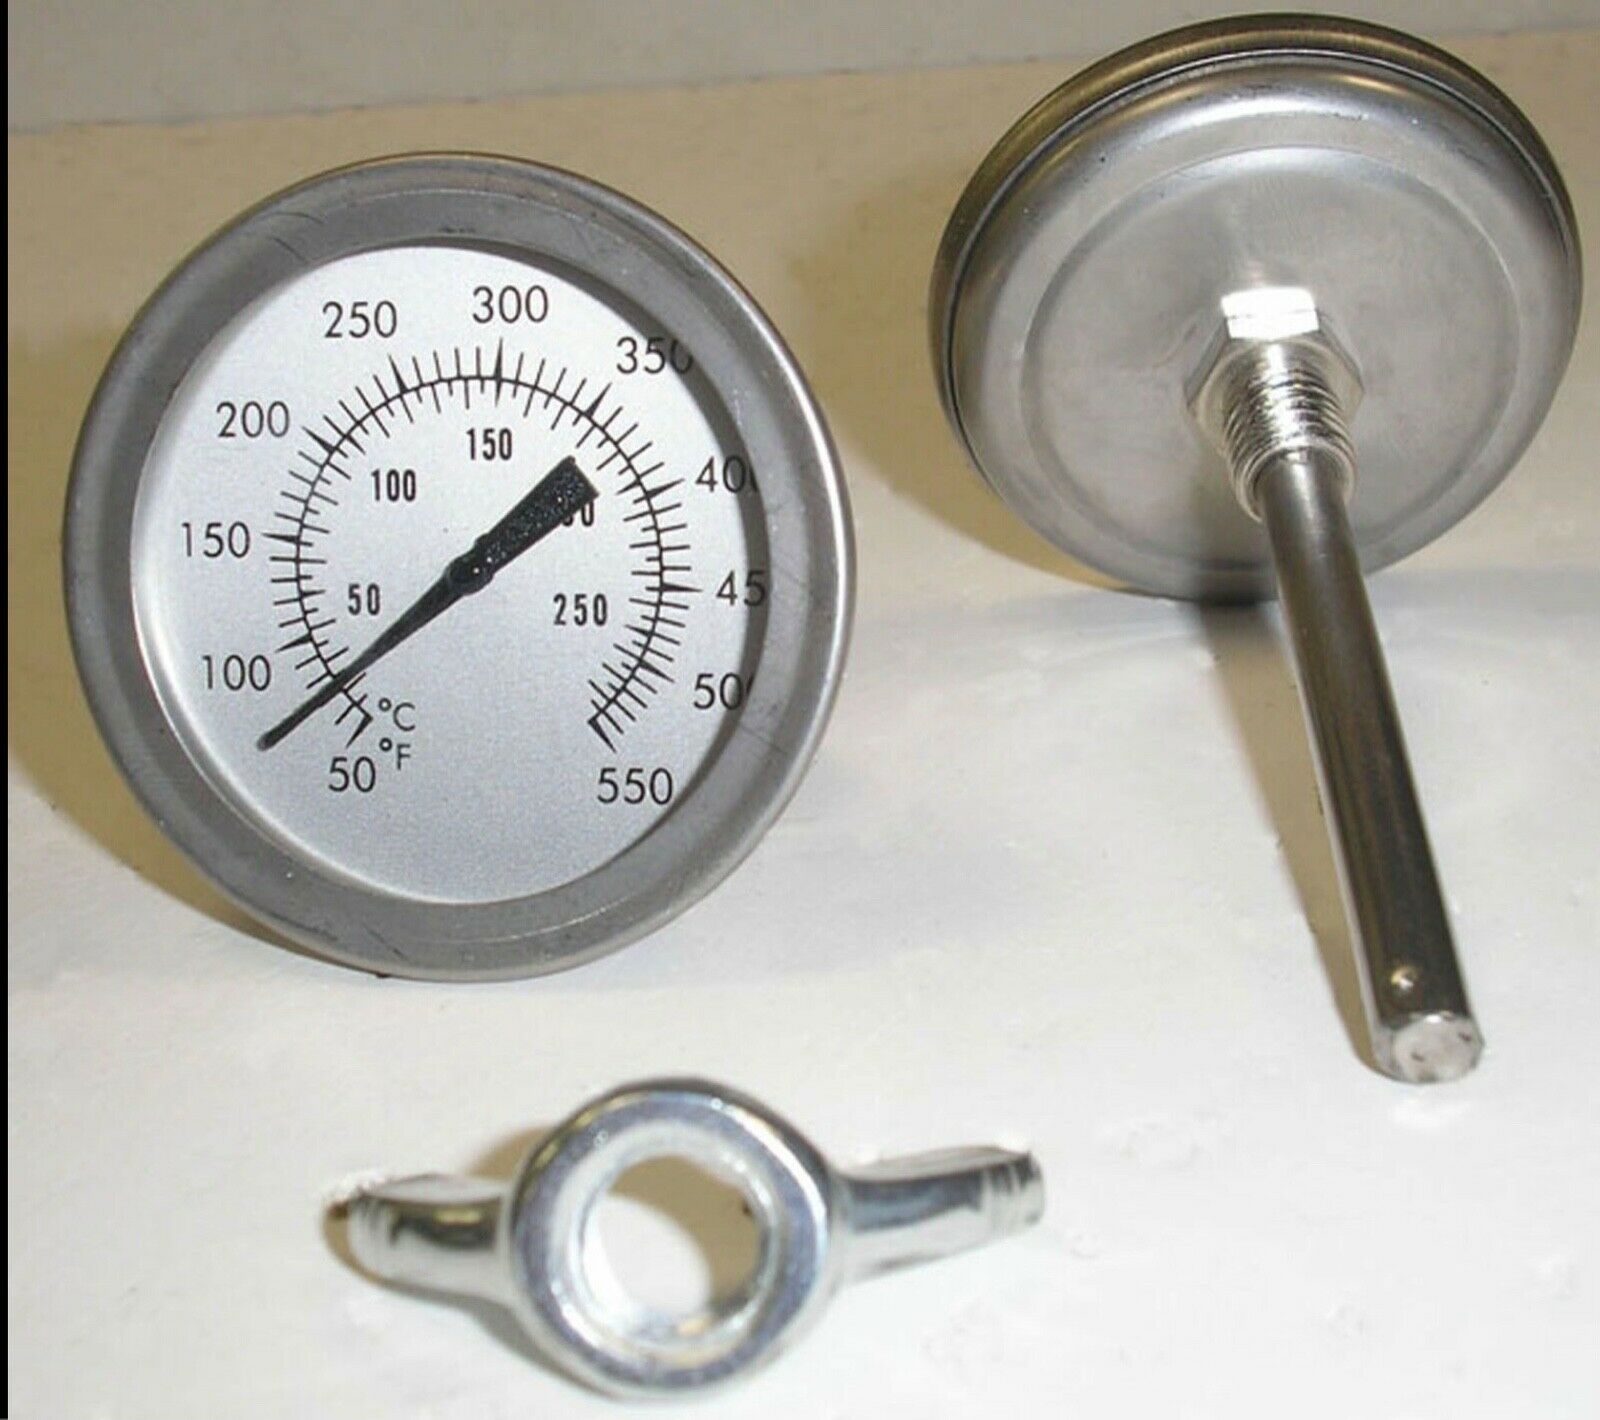 New Arrival ! F&c 2" Bbq Smoker/pit/grill Thermometer Temp Gauge !